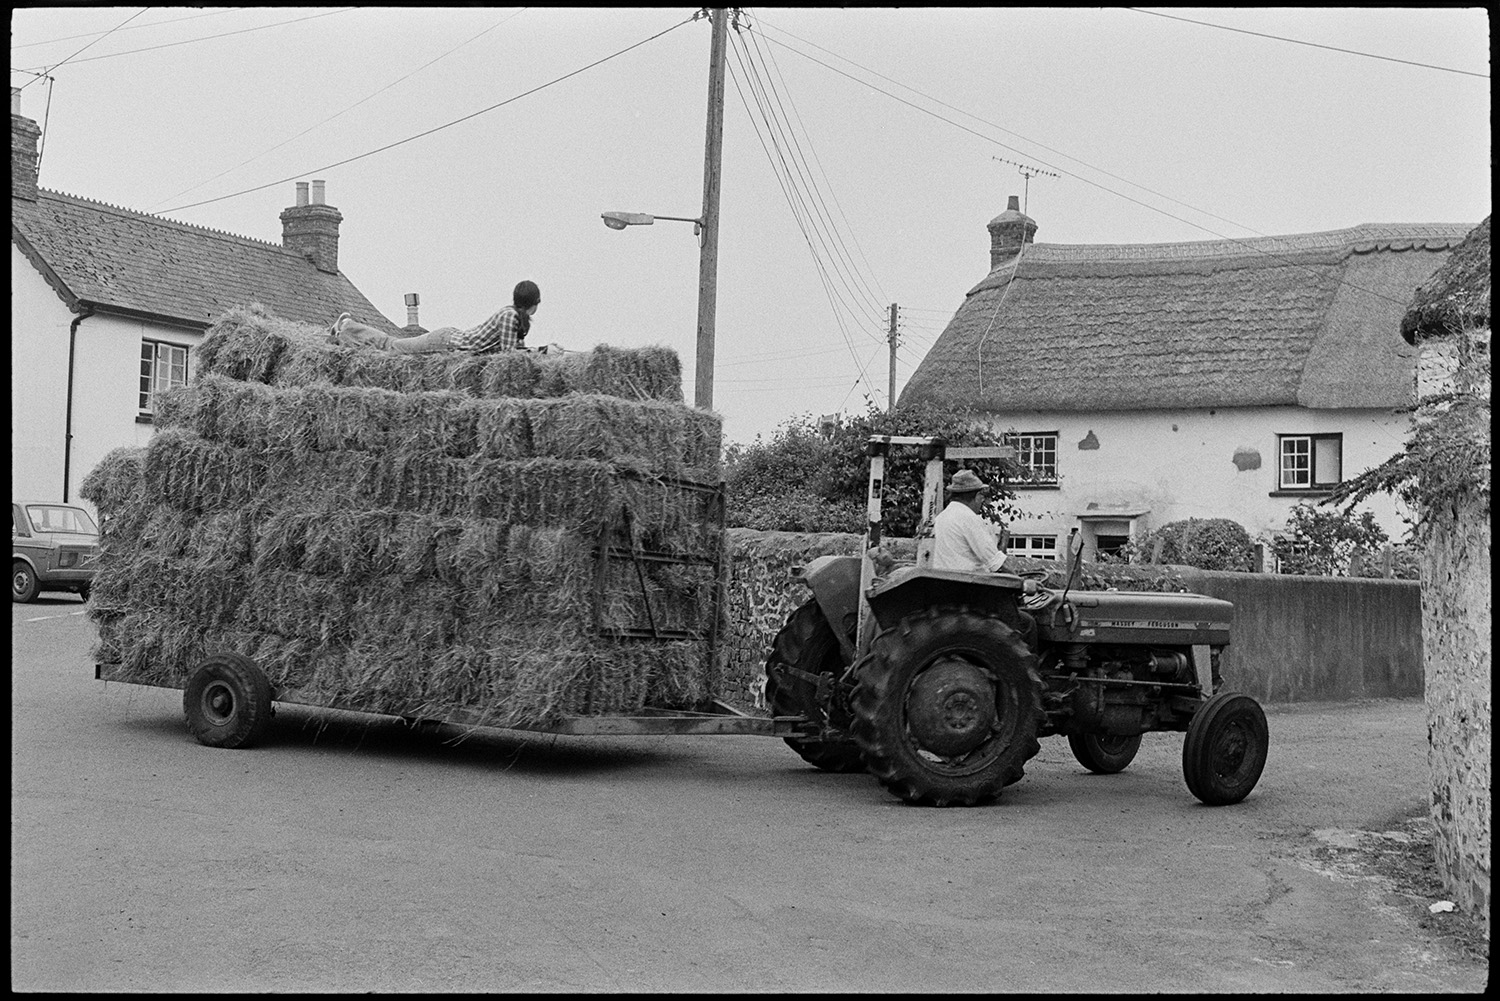 A man driving a tractor and trailer loaded with hay through a street, possibly in Dolton. A person is laying on top of the hay.